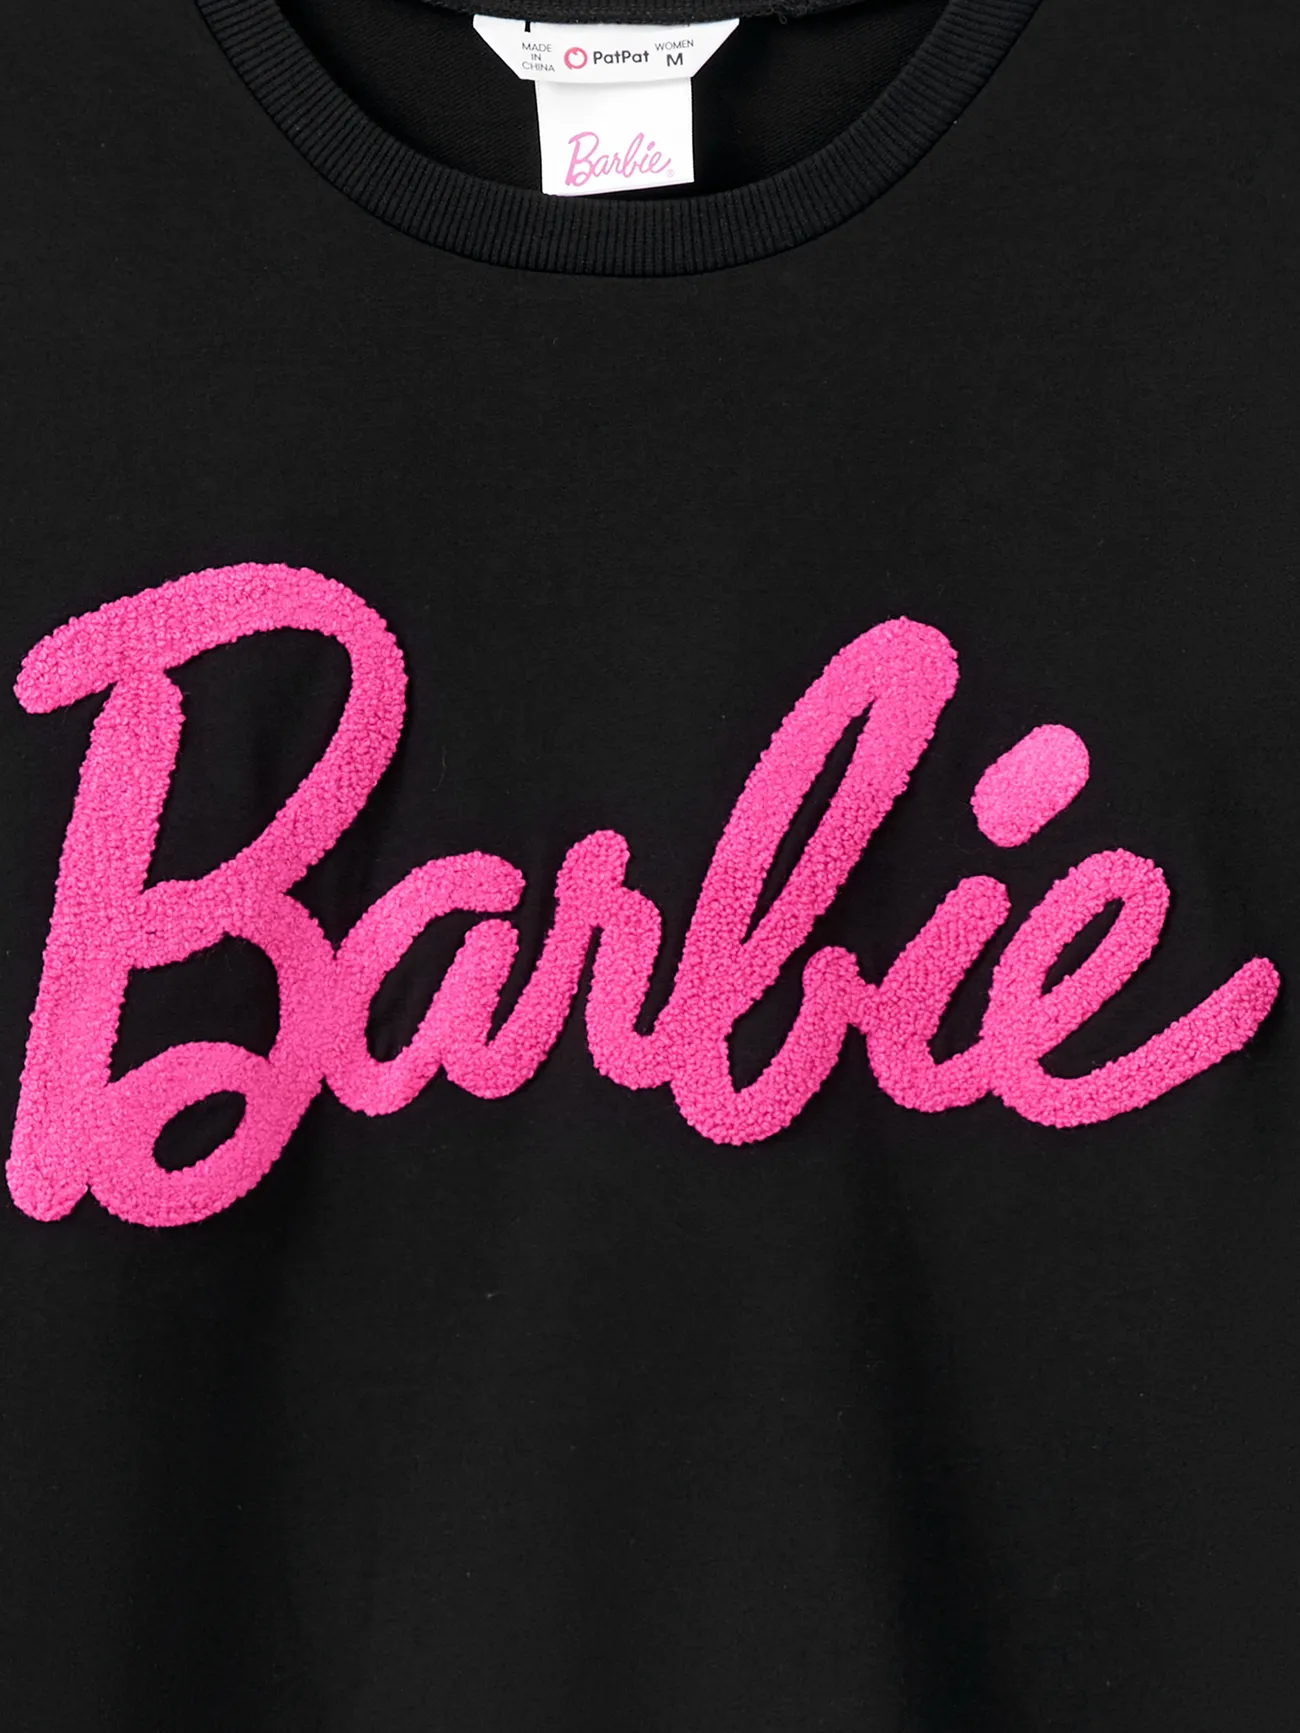 Barbie Mommy and Me Letter Embroidered Long-sleeve Cotton Sweatshirt Black big image 1